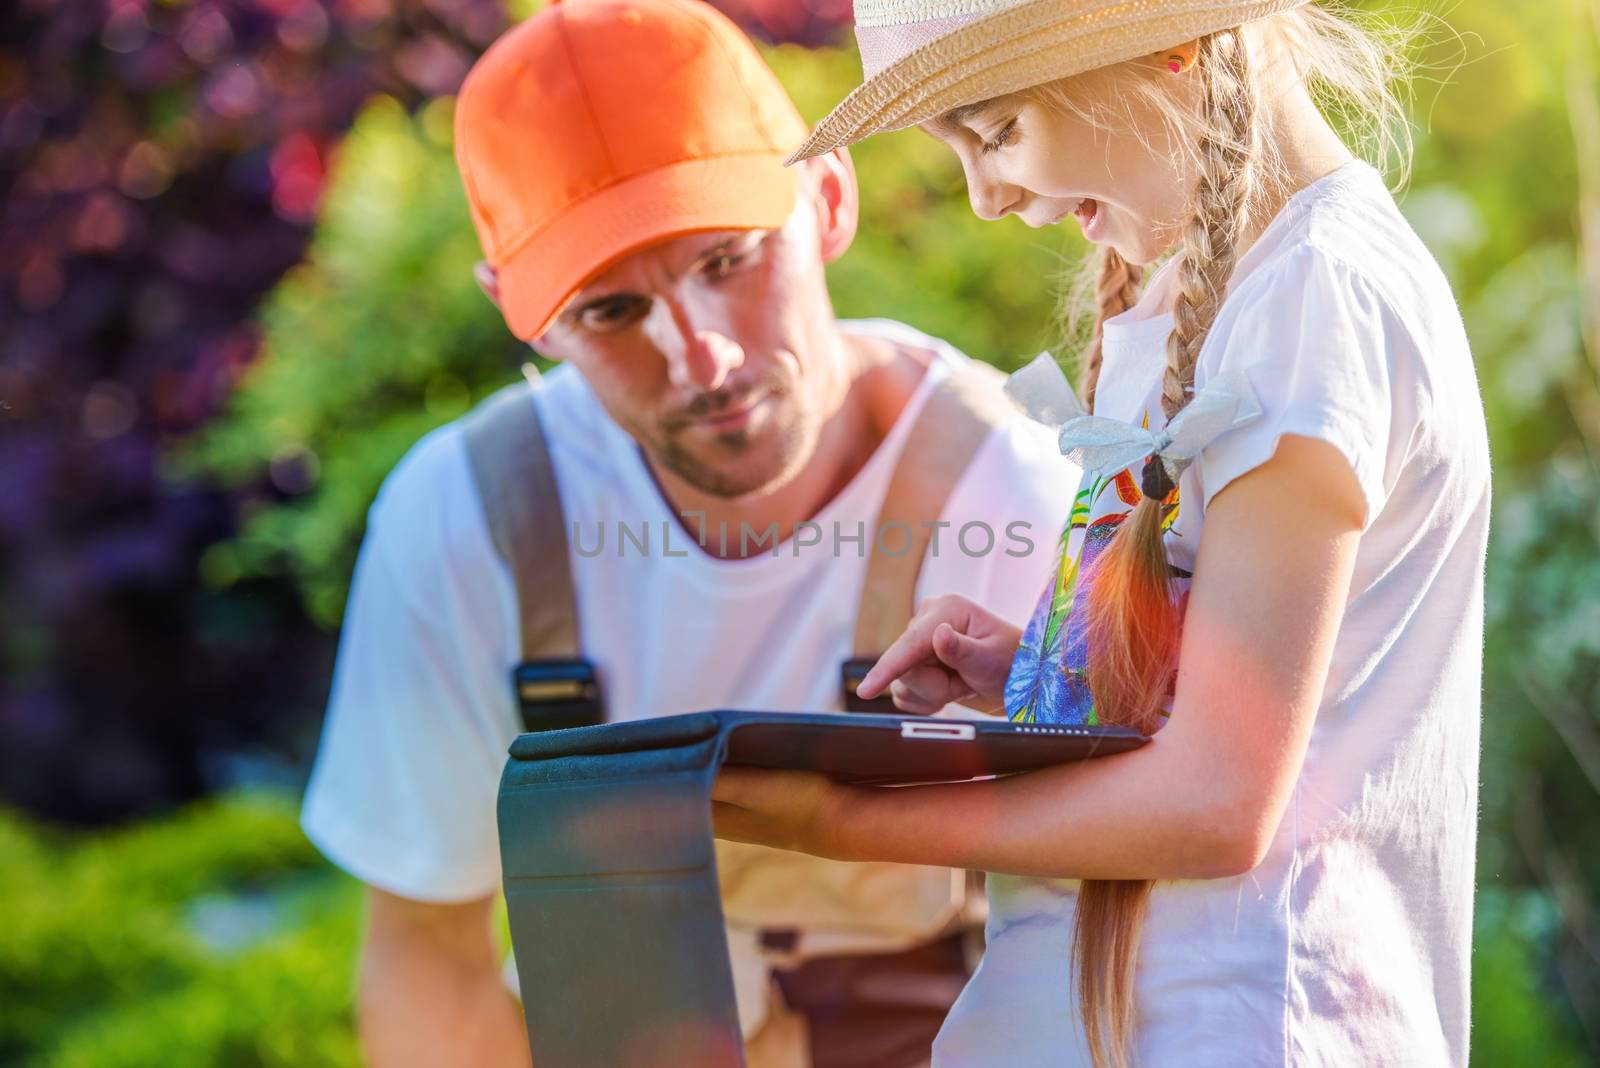 Family Time in the Garden. Girl Showing Her Dad How Internet Works While Playing on Her Tablet Device.